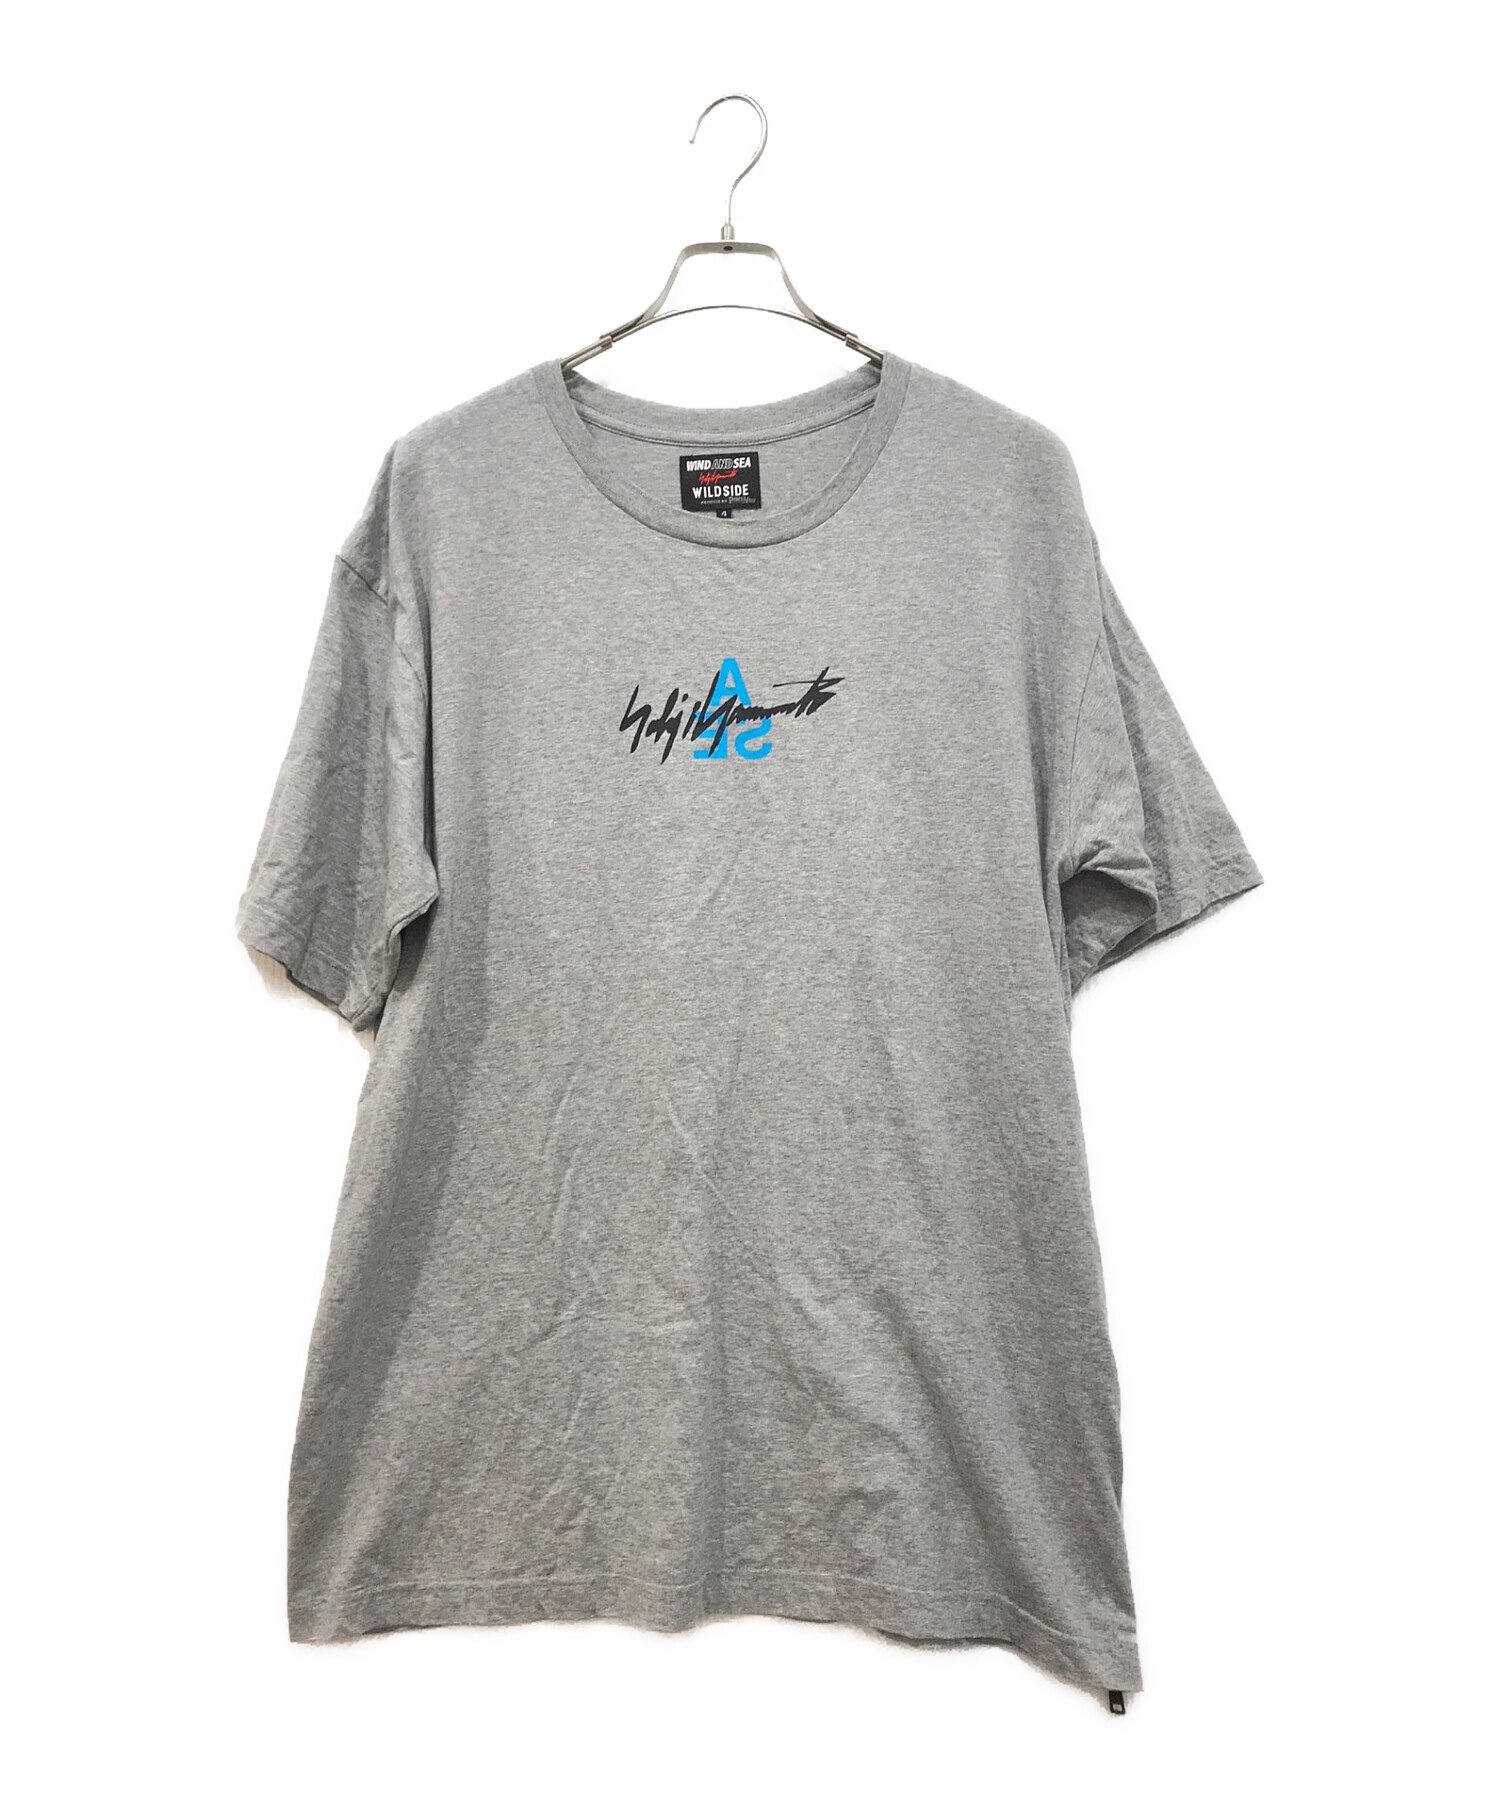 wind and sea × wildside Tシャツ （L）